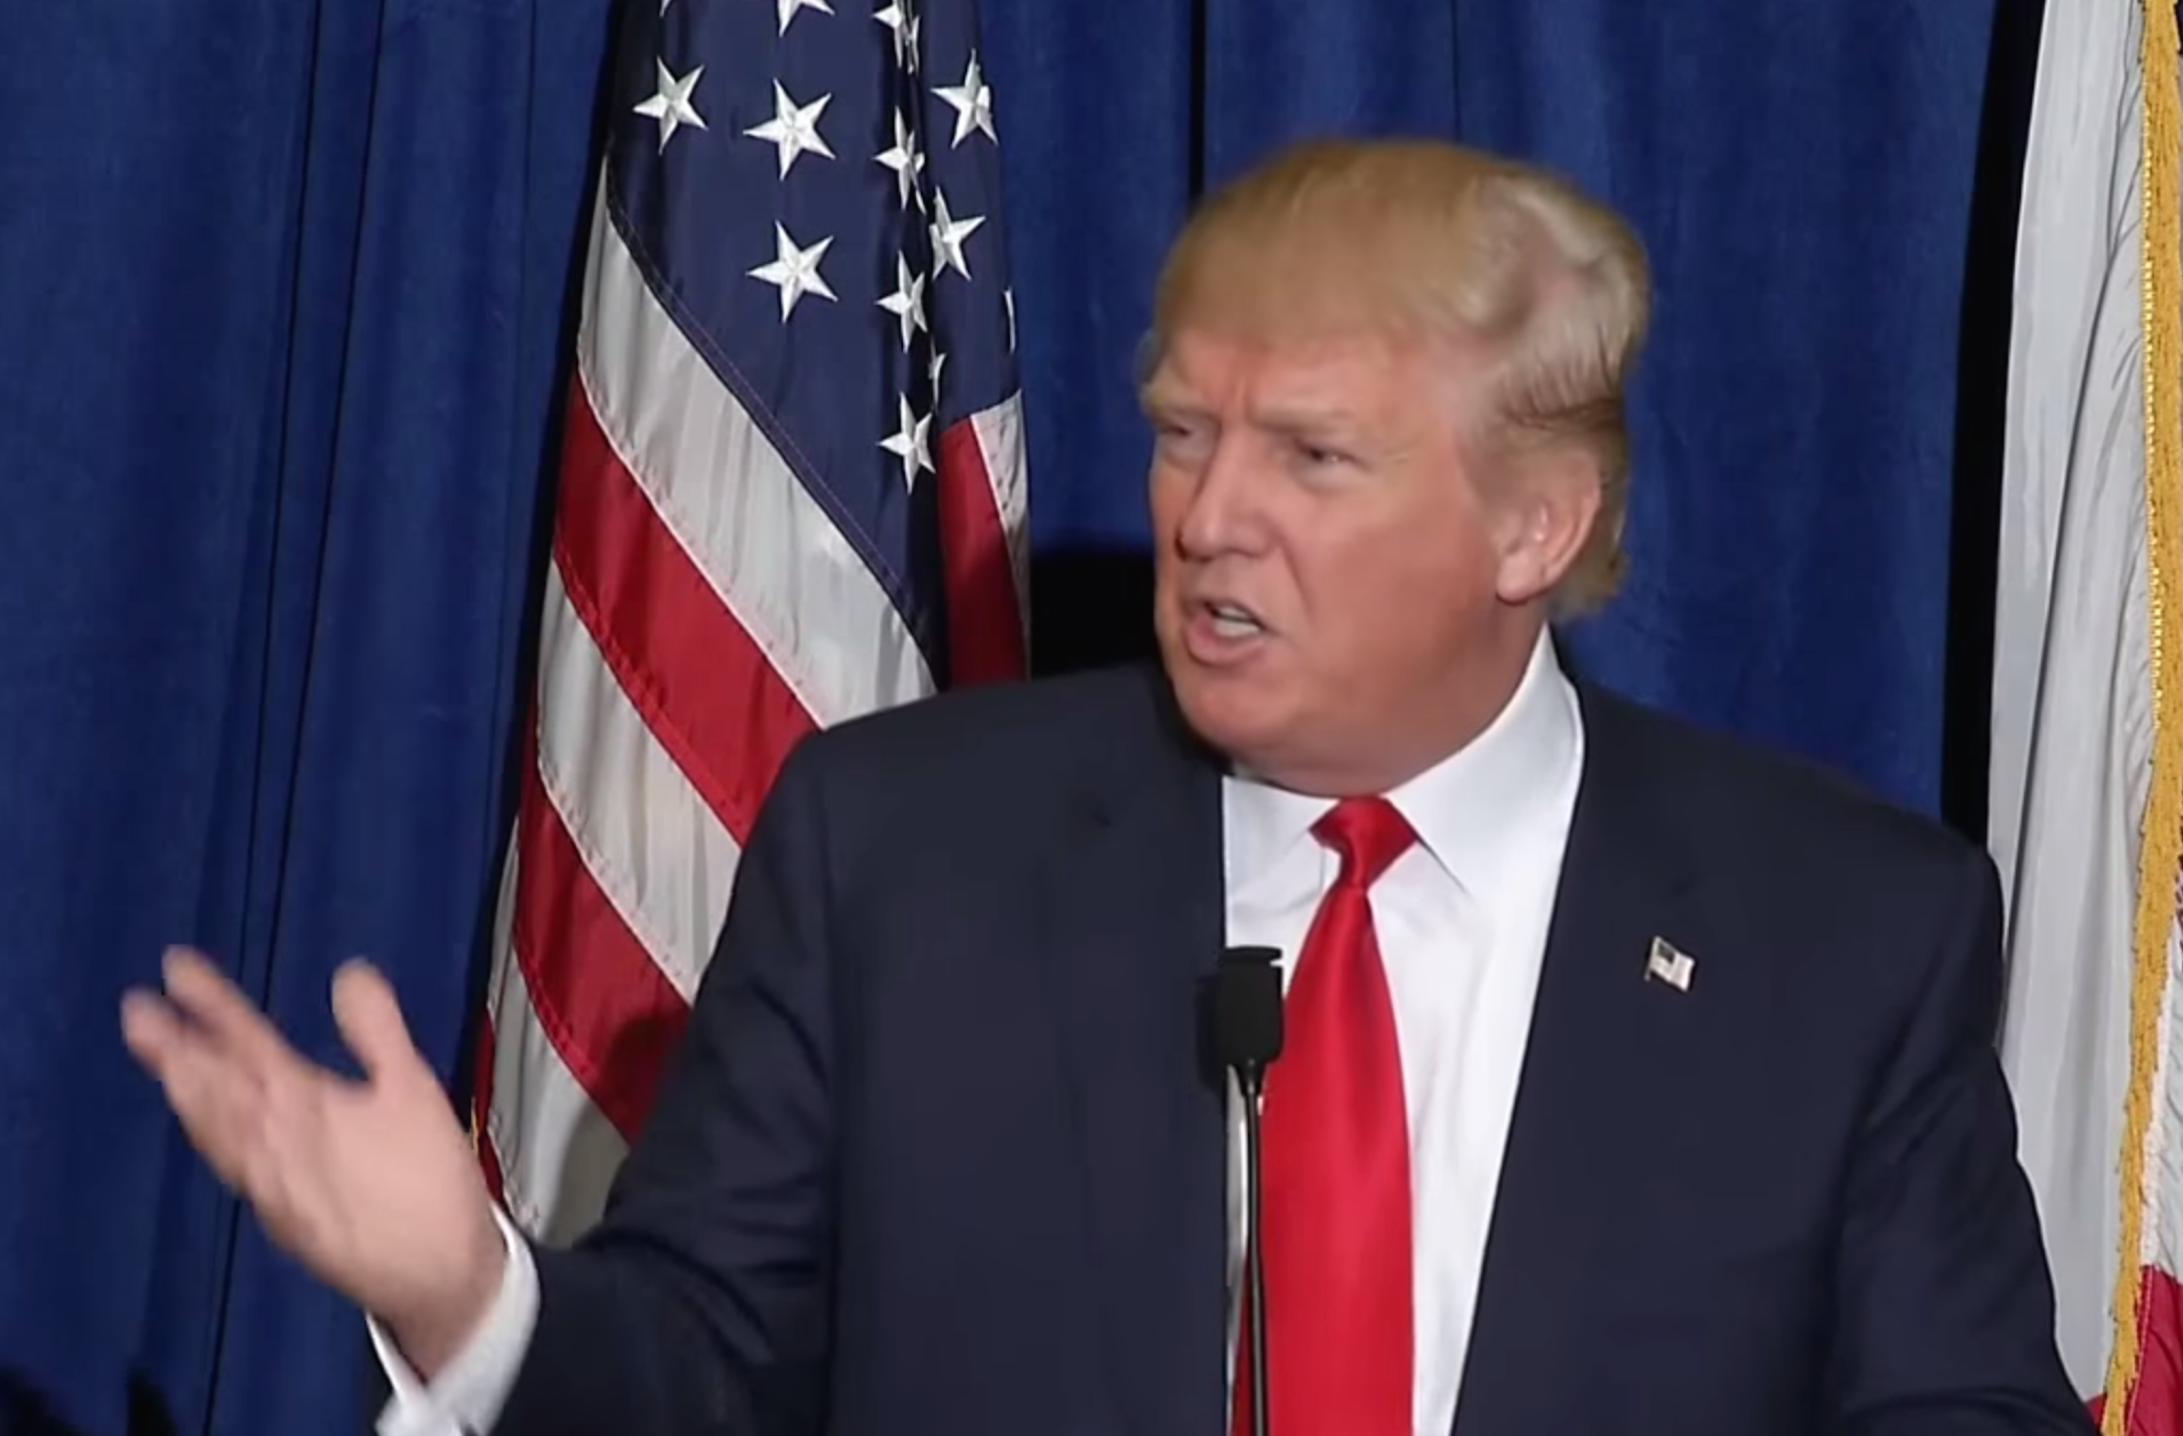 Donald Trump kicks out journalist Jorge Ramos from press conference ...